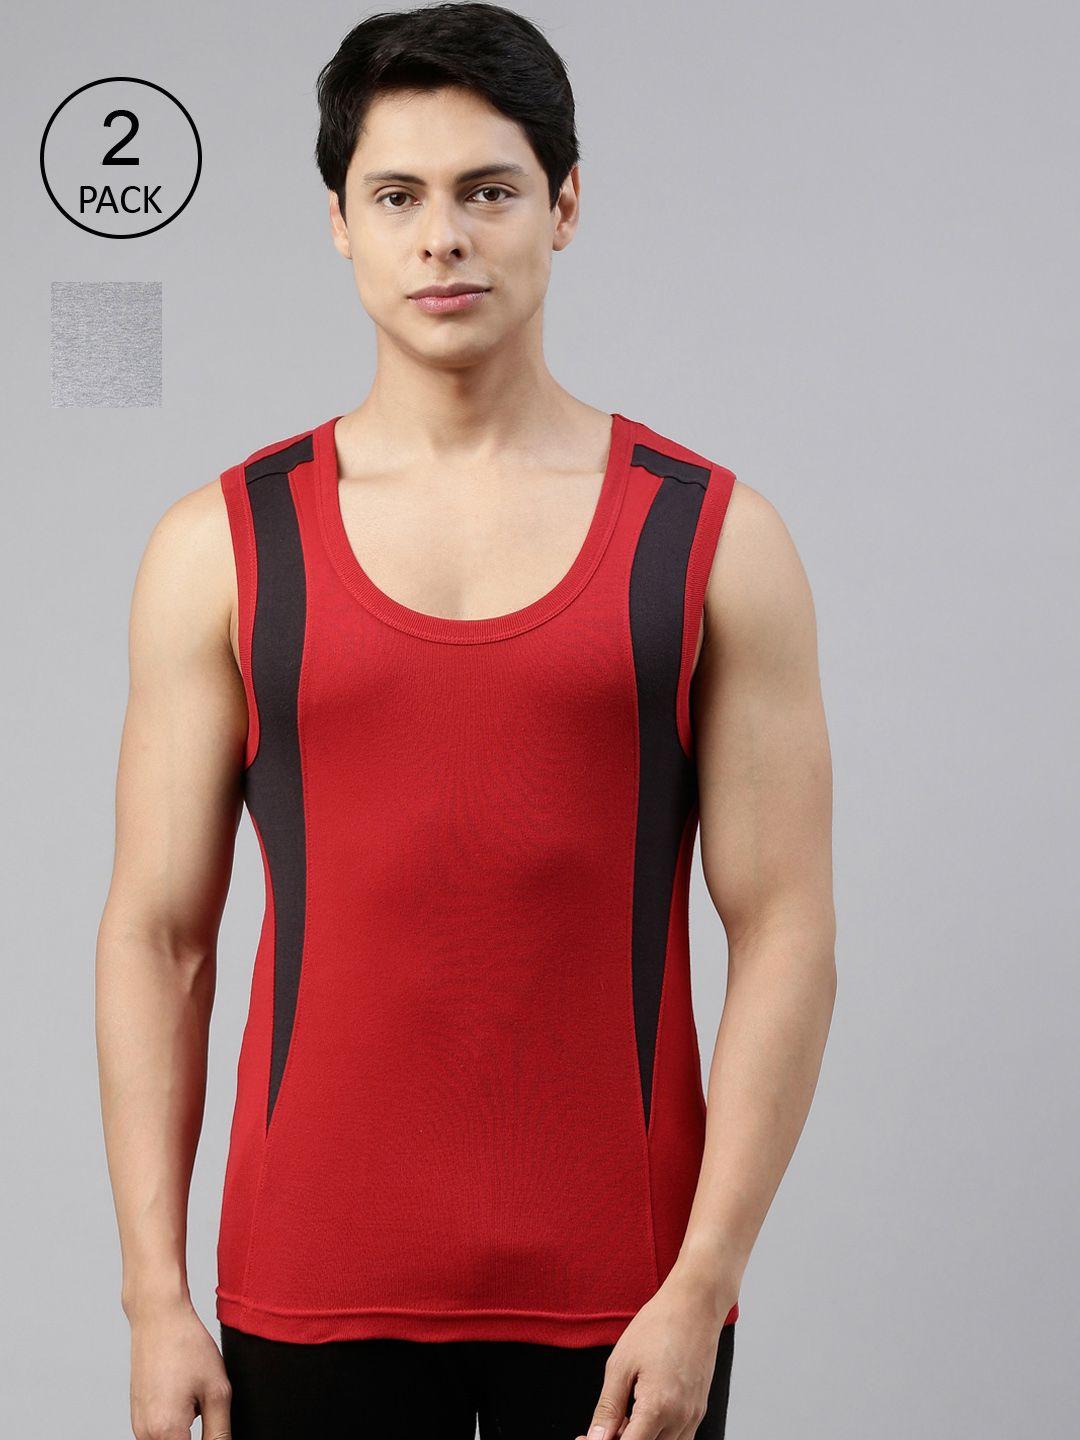 dixcy scott men red & grey pure combed cotton gym vests pack of 2